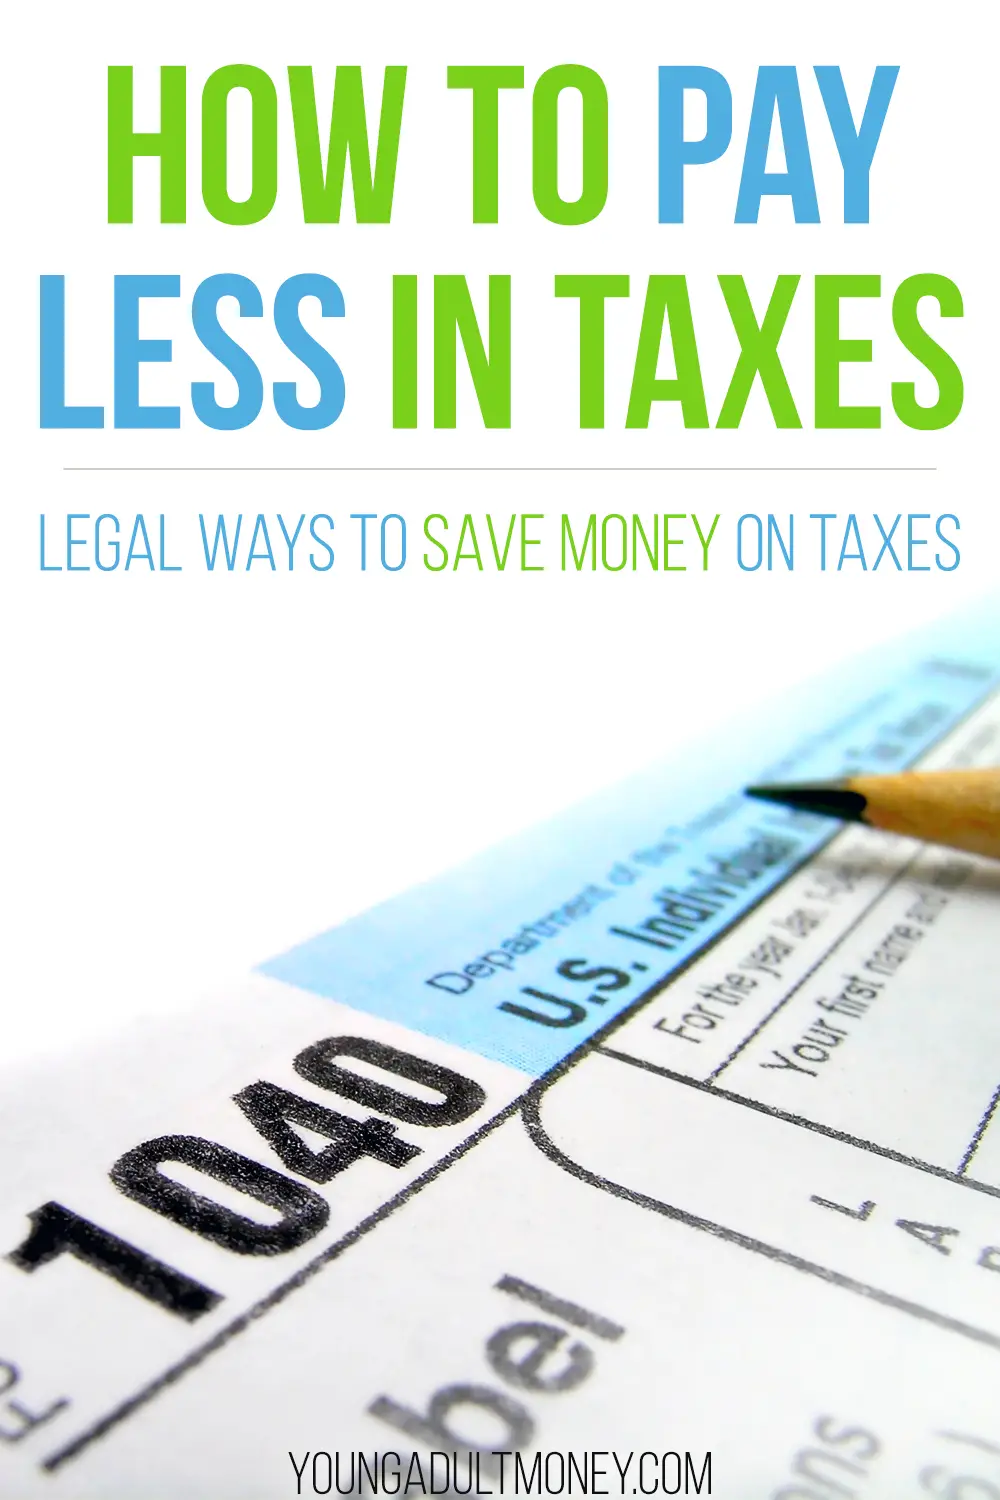 How to Pay Less in Taxes: Save Money on Taxes (Legally) in ...